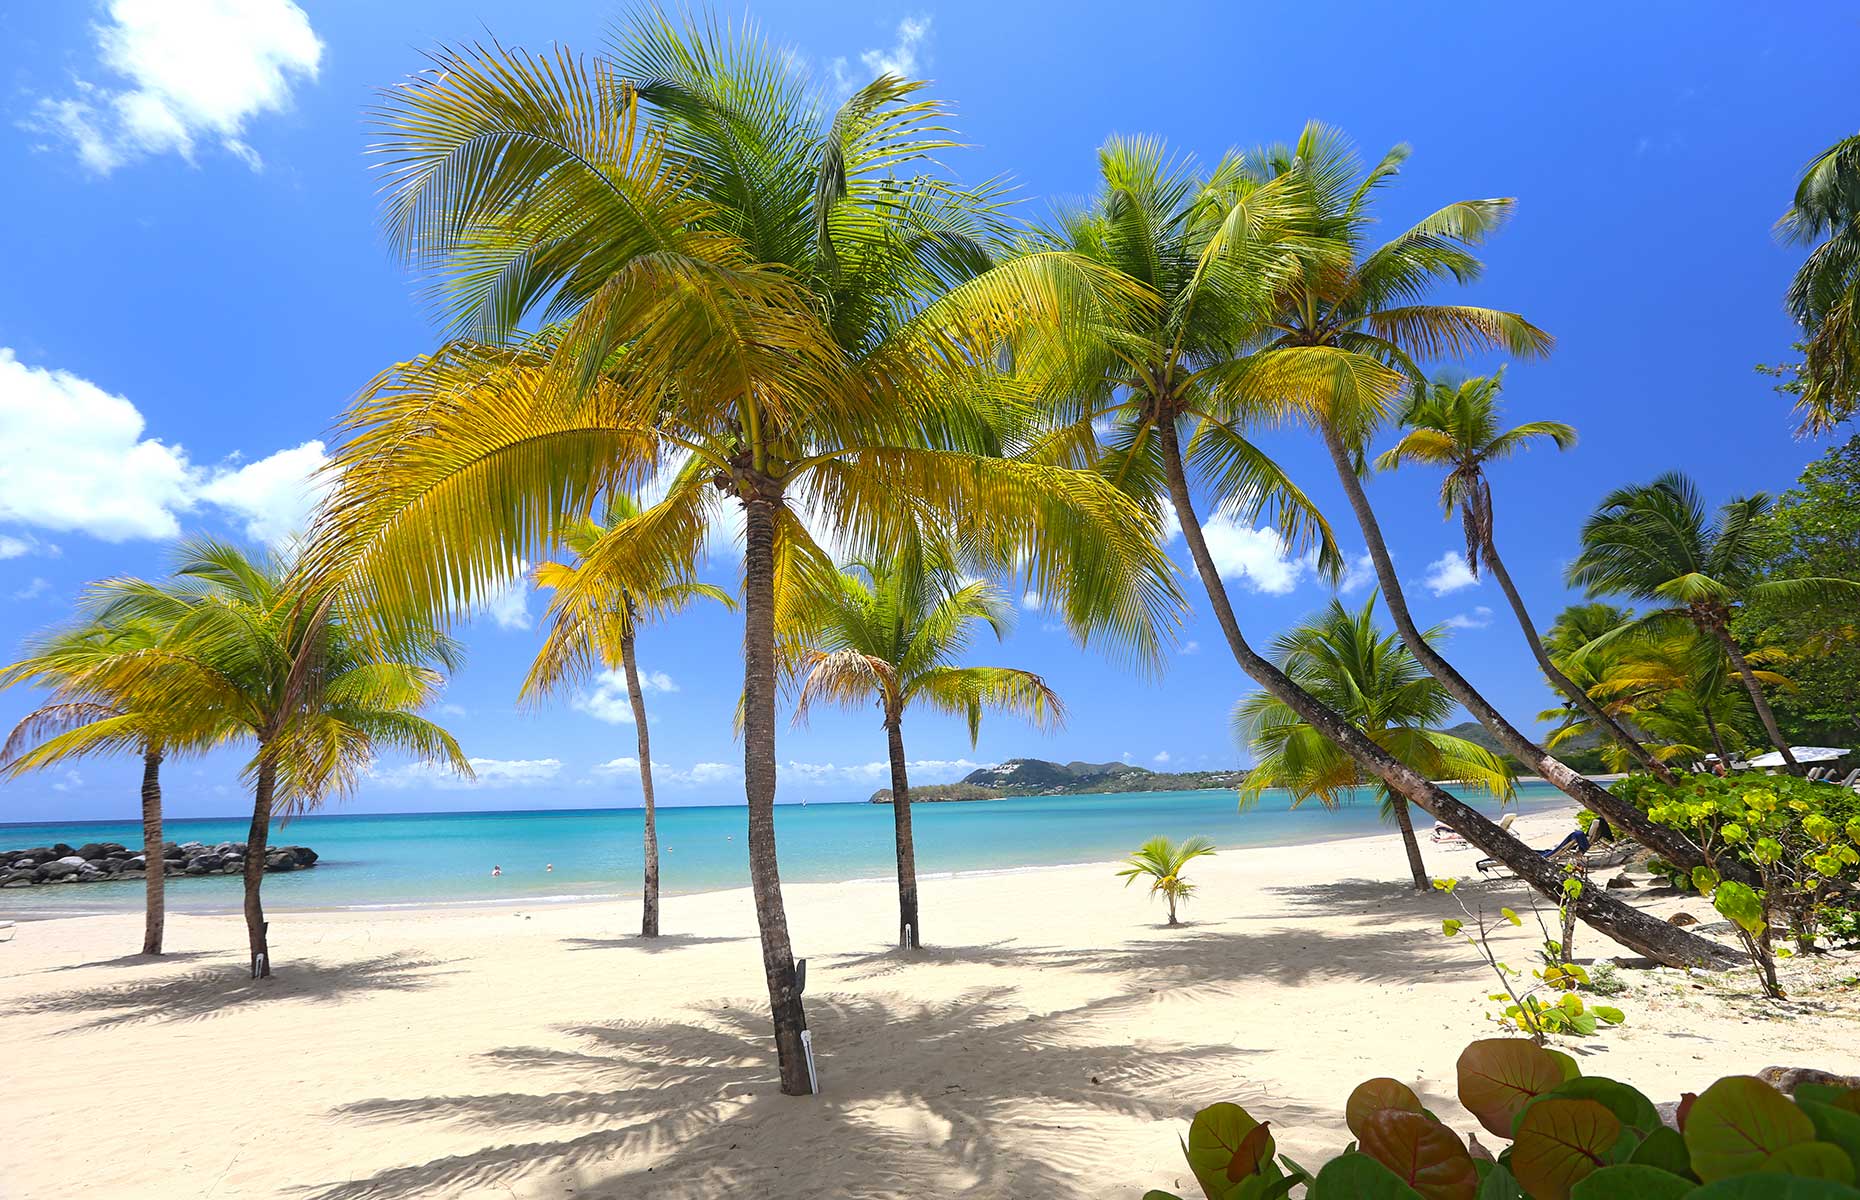 Image of a beach on Saint Lucia with umbrellas and vanilla-coloured sands (Image: Courtesy of the Saint Lucia Tourism Authority)